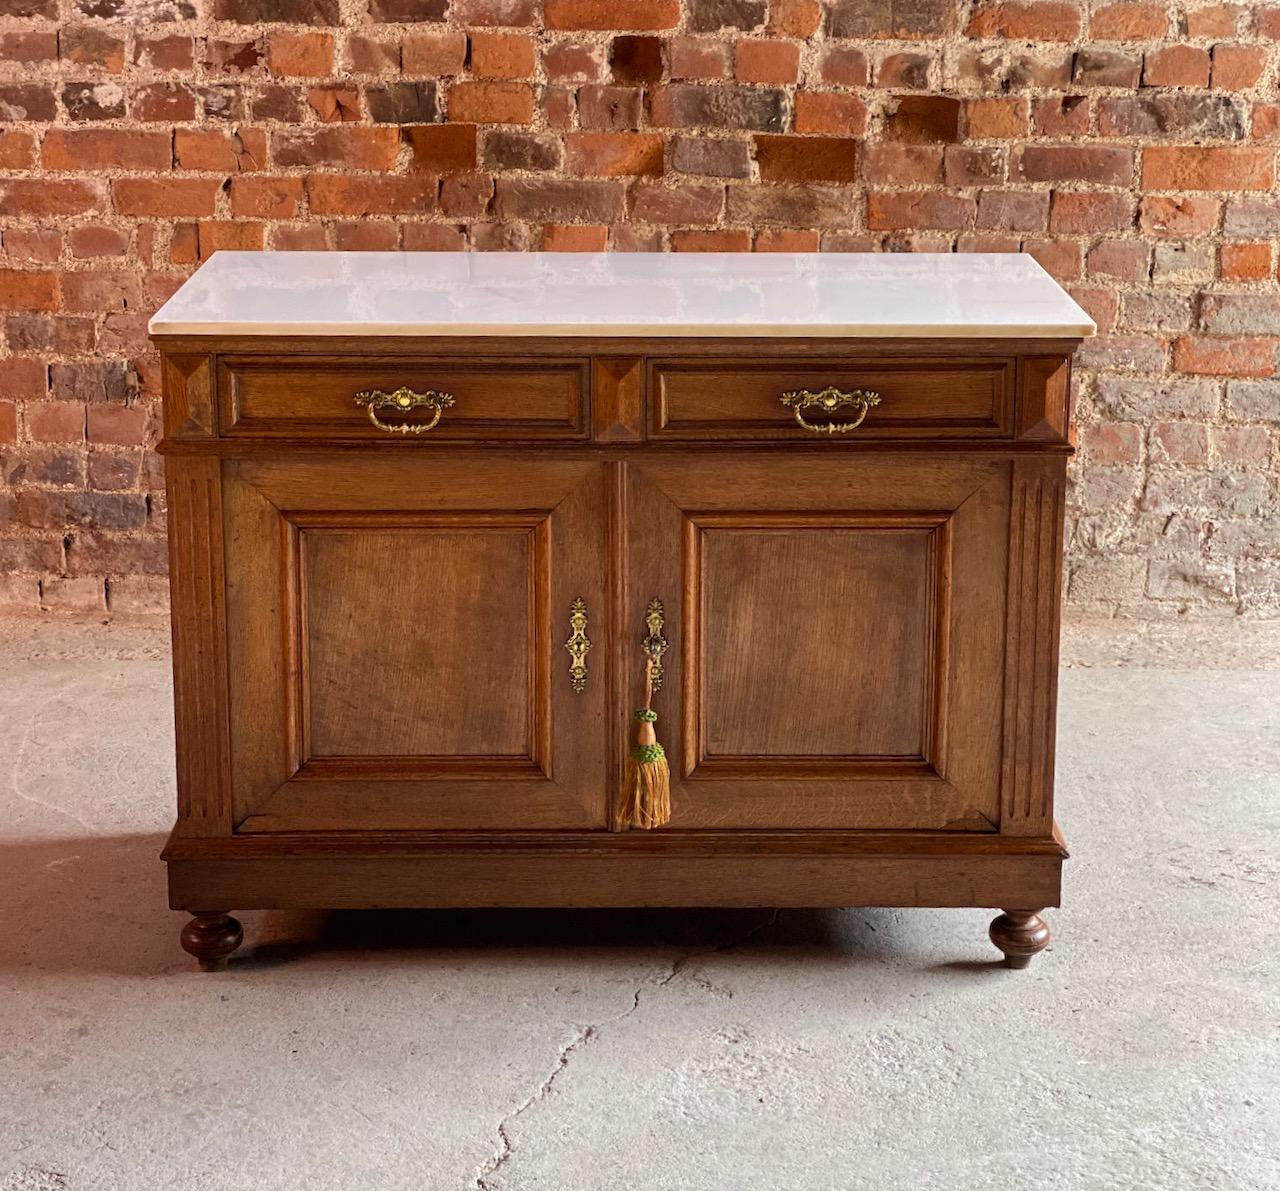 Antique French marble cupboard France, circa 1870 number 3

A stunning antique Napoleon III marble topped golden oak free standing cupboard dating to France circa 1870, the rectangular white marble top with a light pink vein over two short drawers